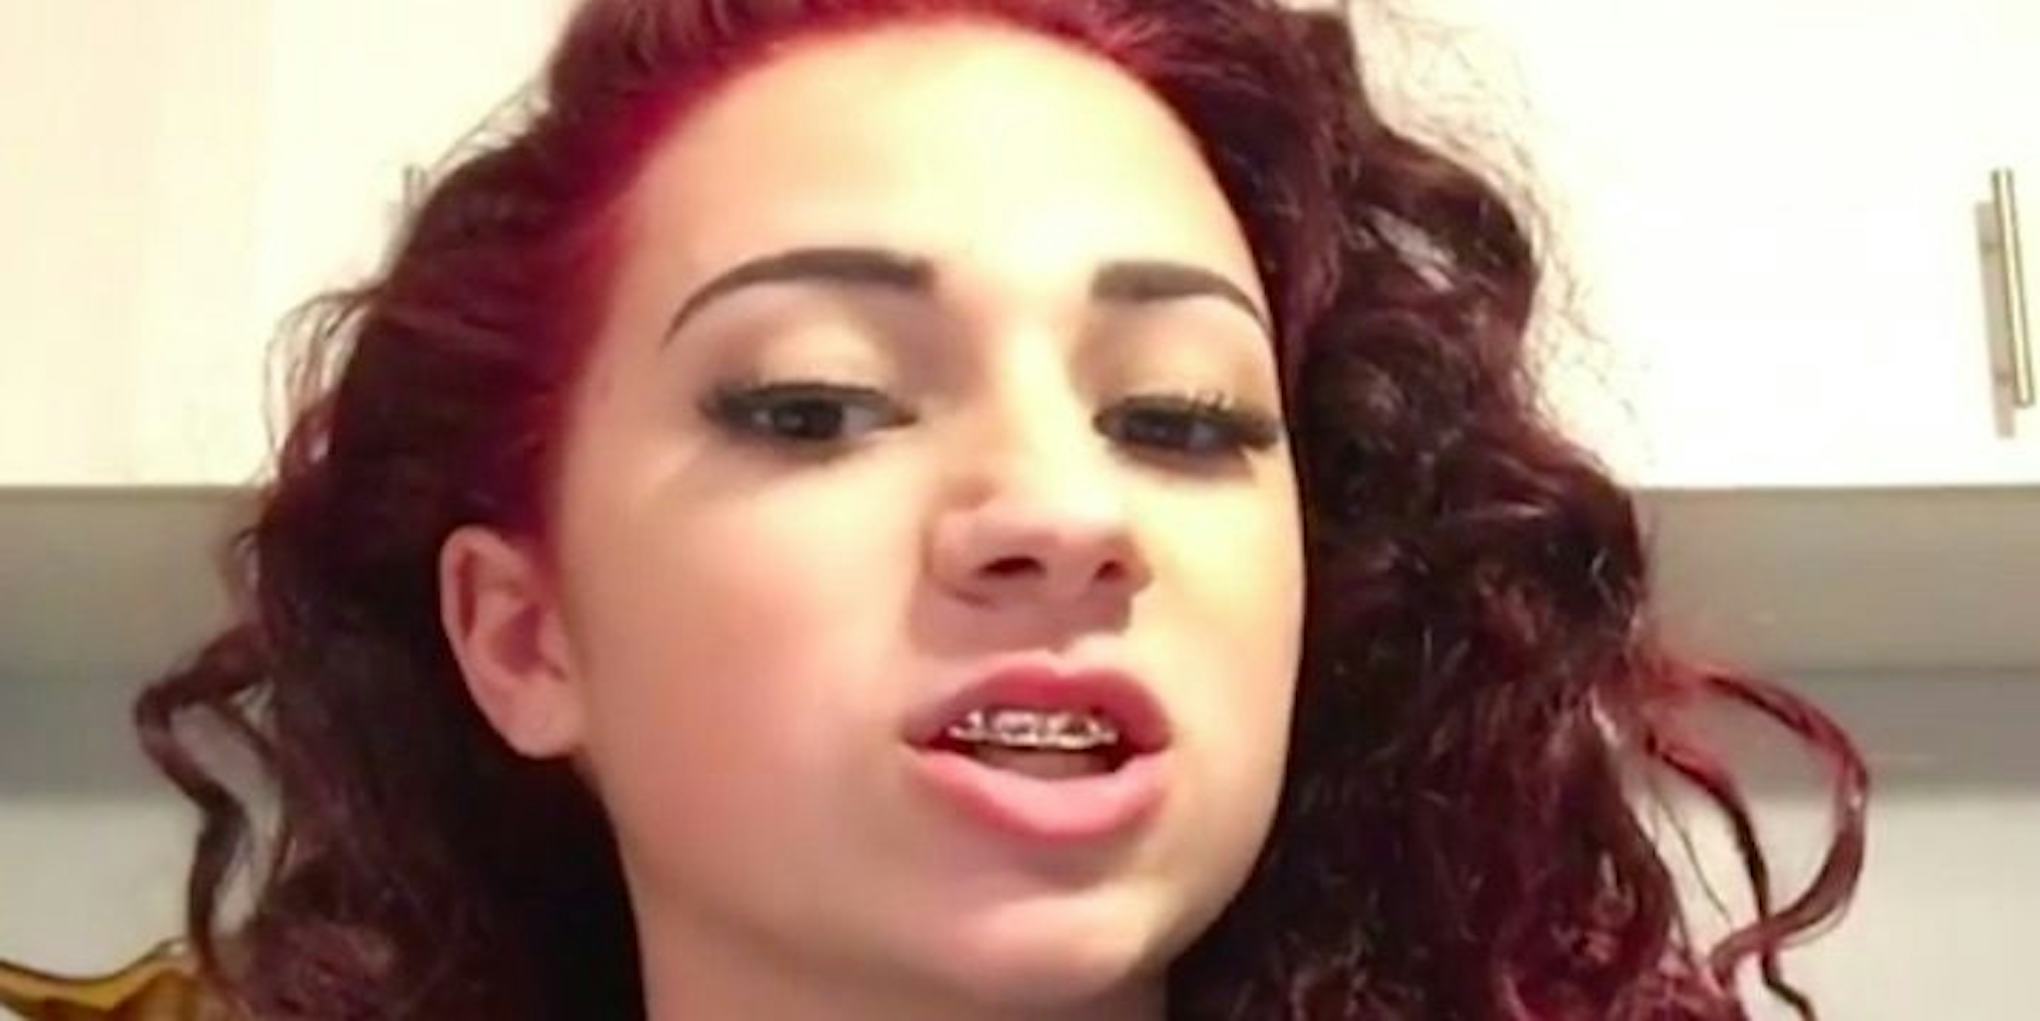 Cash Me Outside Girl Has Savage Instagram Account 